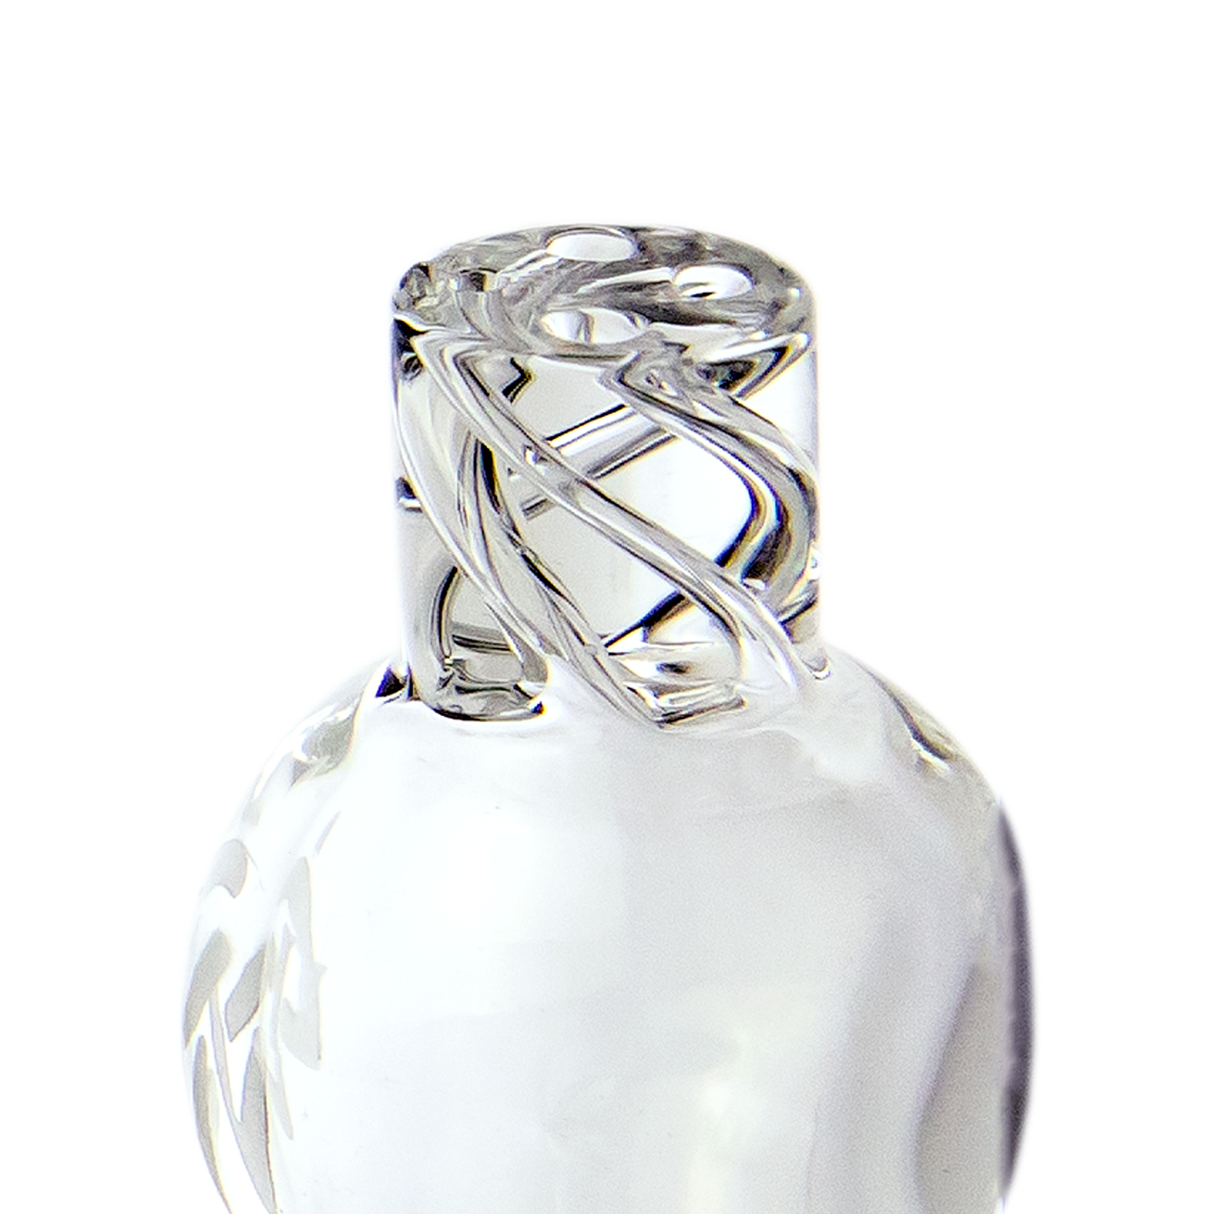 MJ Arsenal - Clear Spinner Carb Cap for Dab Rigs, Borosilicate Glass, Top View